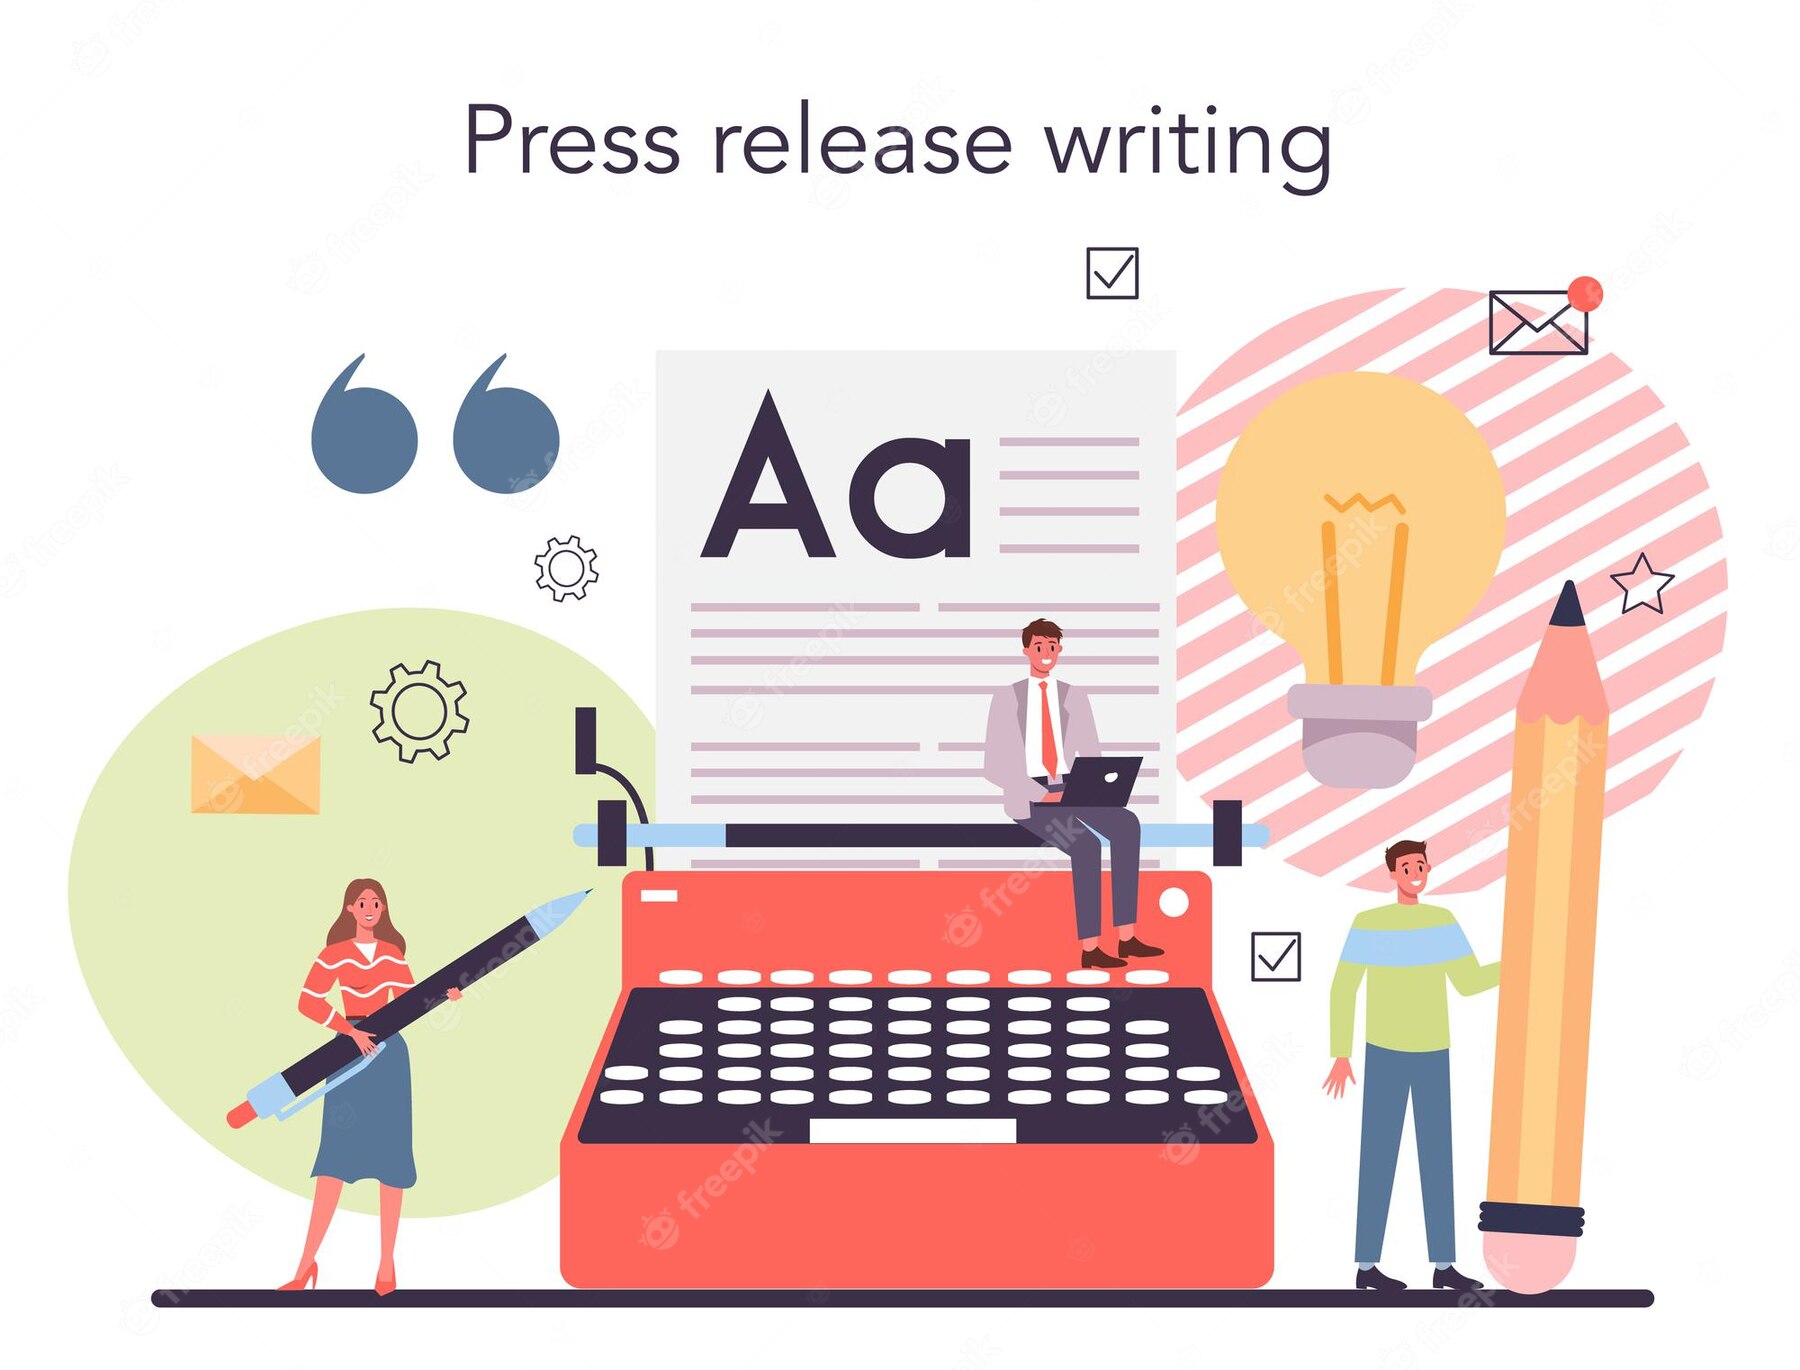 How press release works